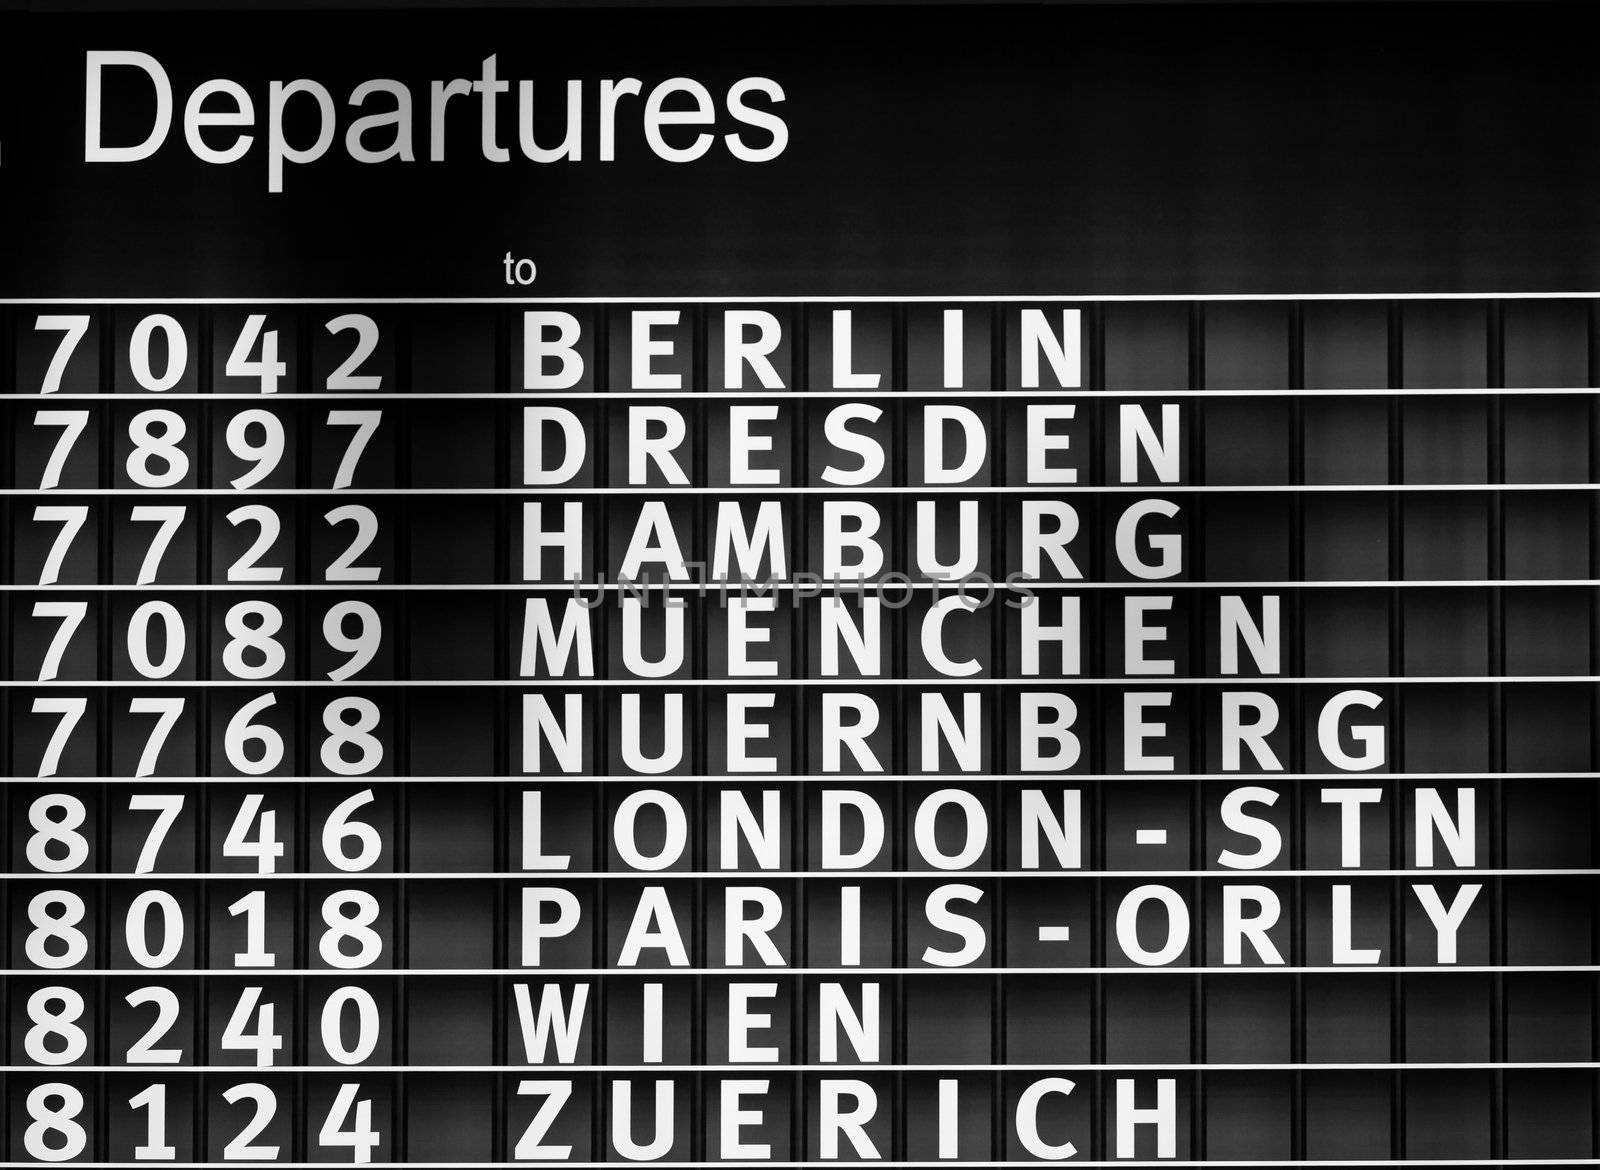 Airport departures information board by PiLens